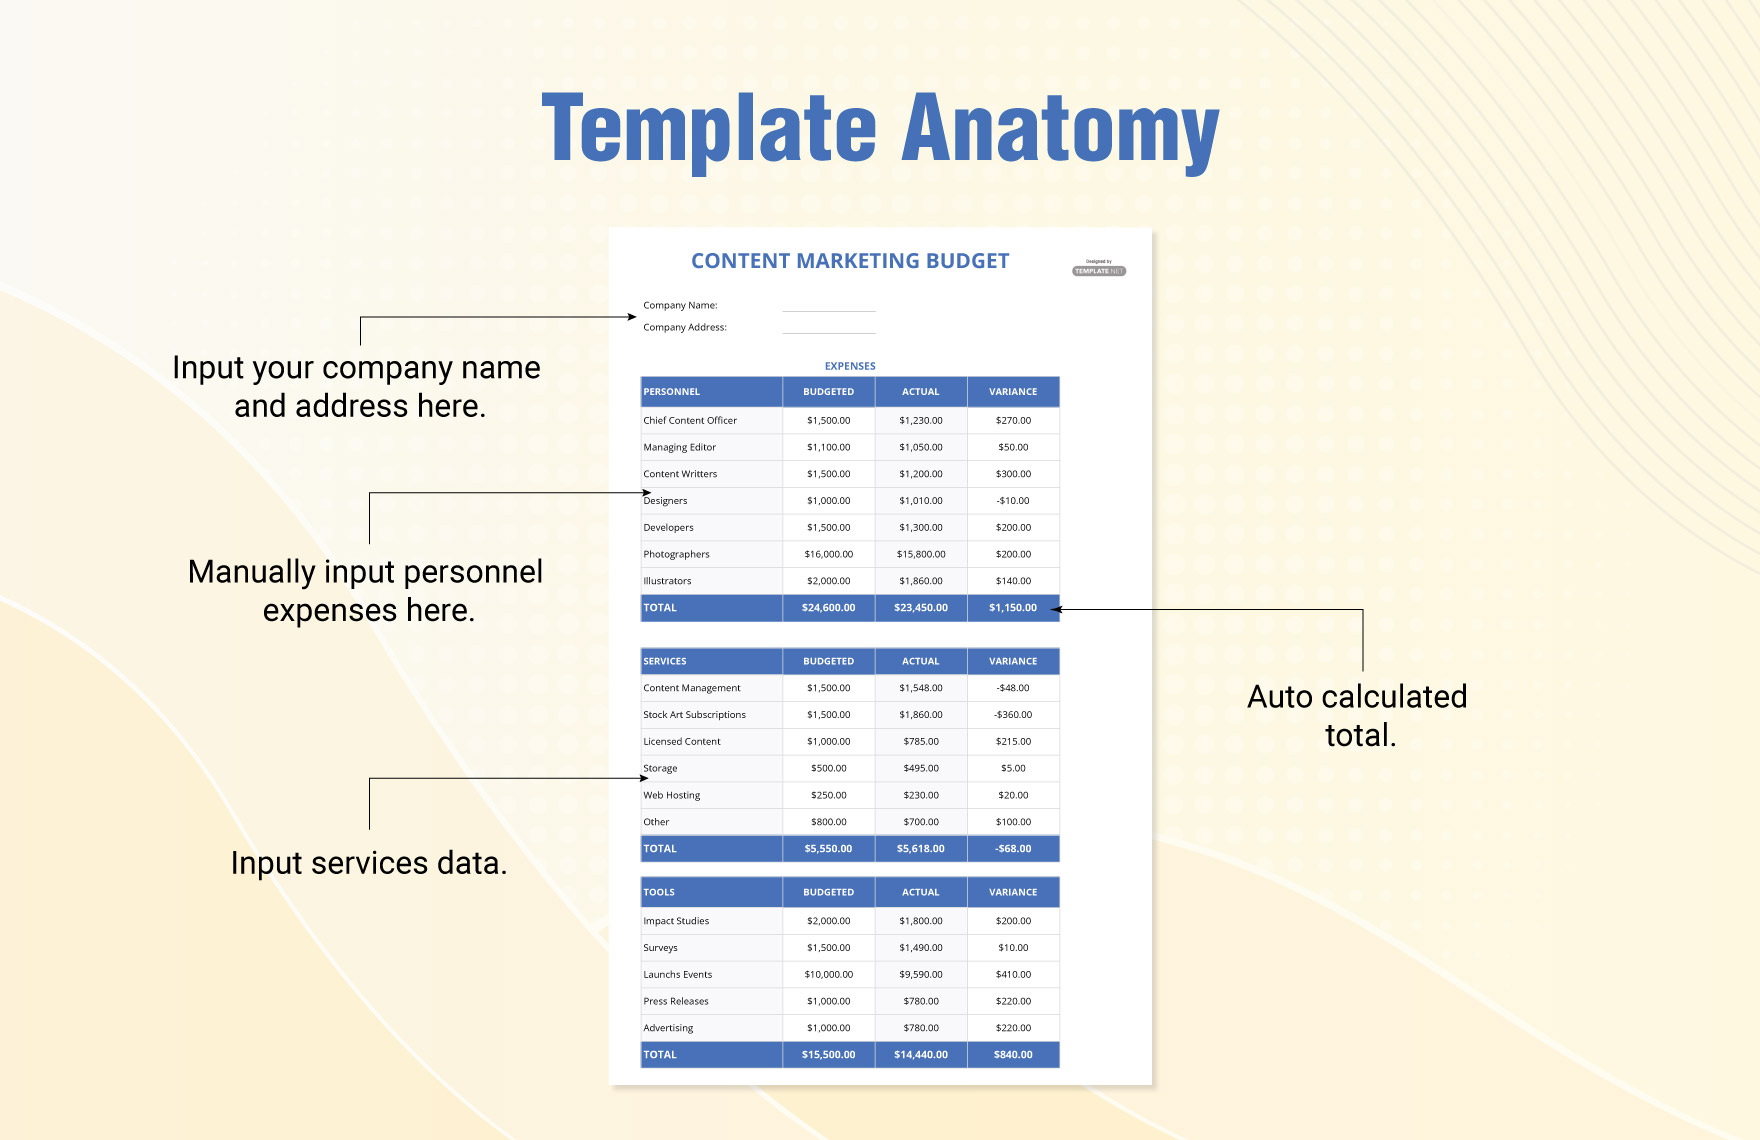 Content Marketing Budget Template